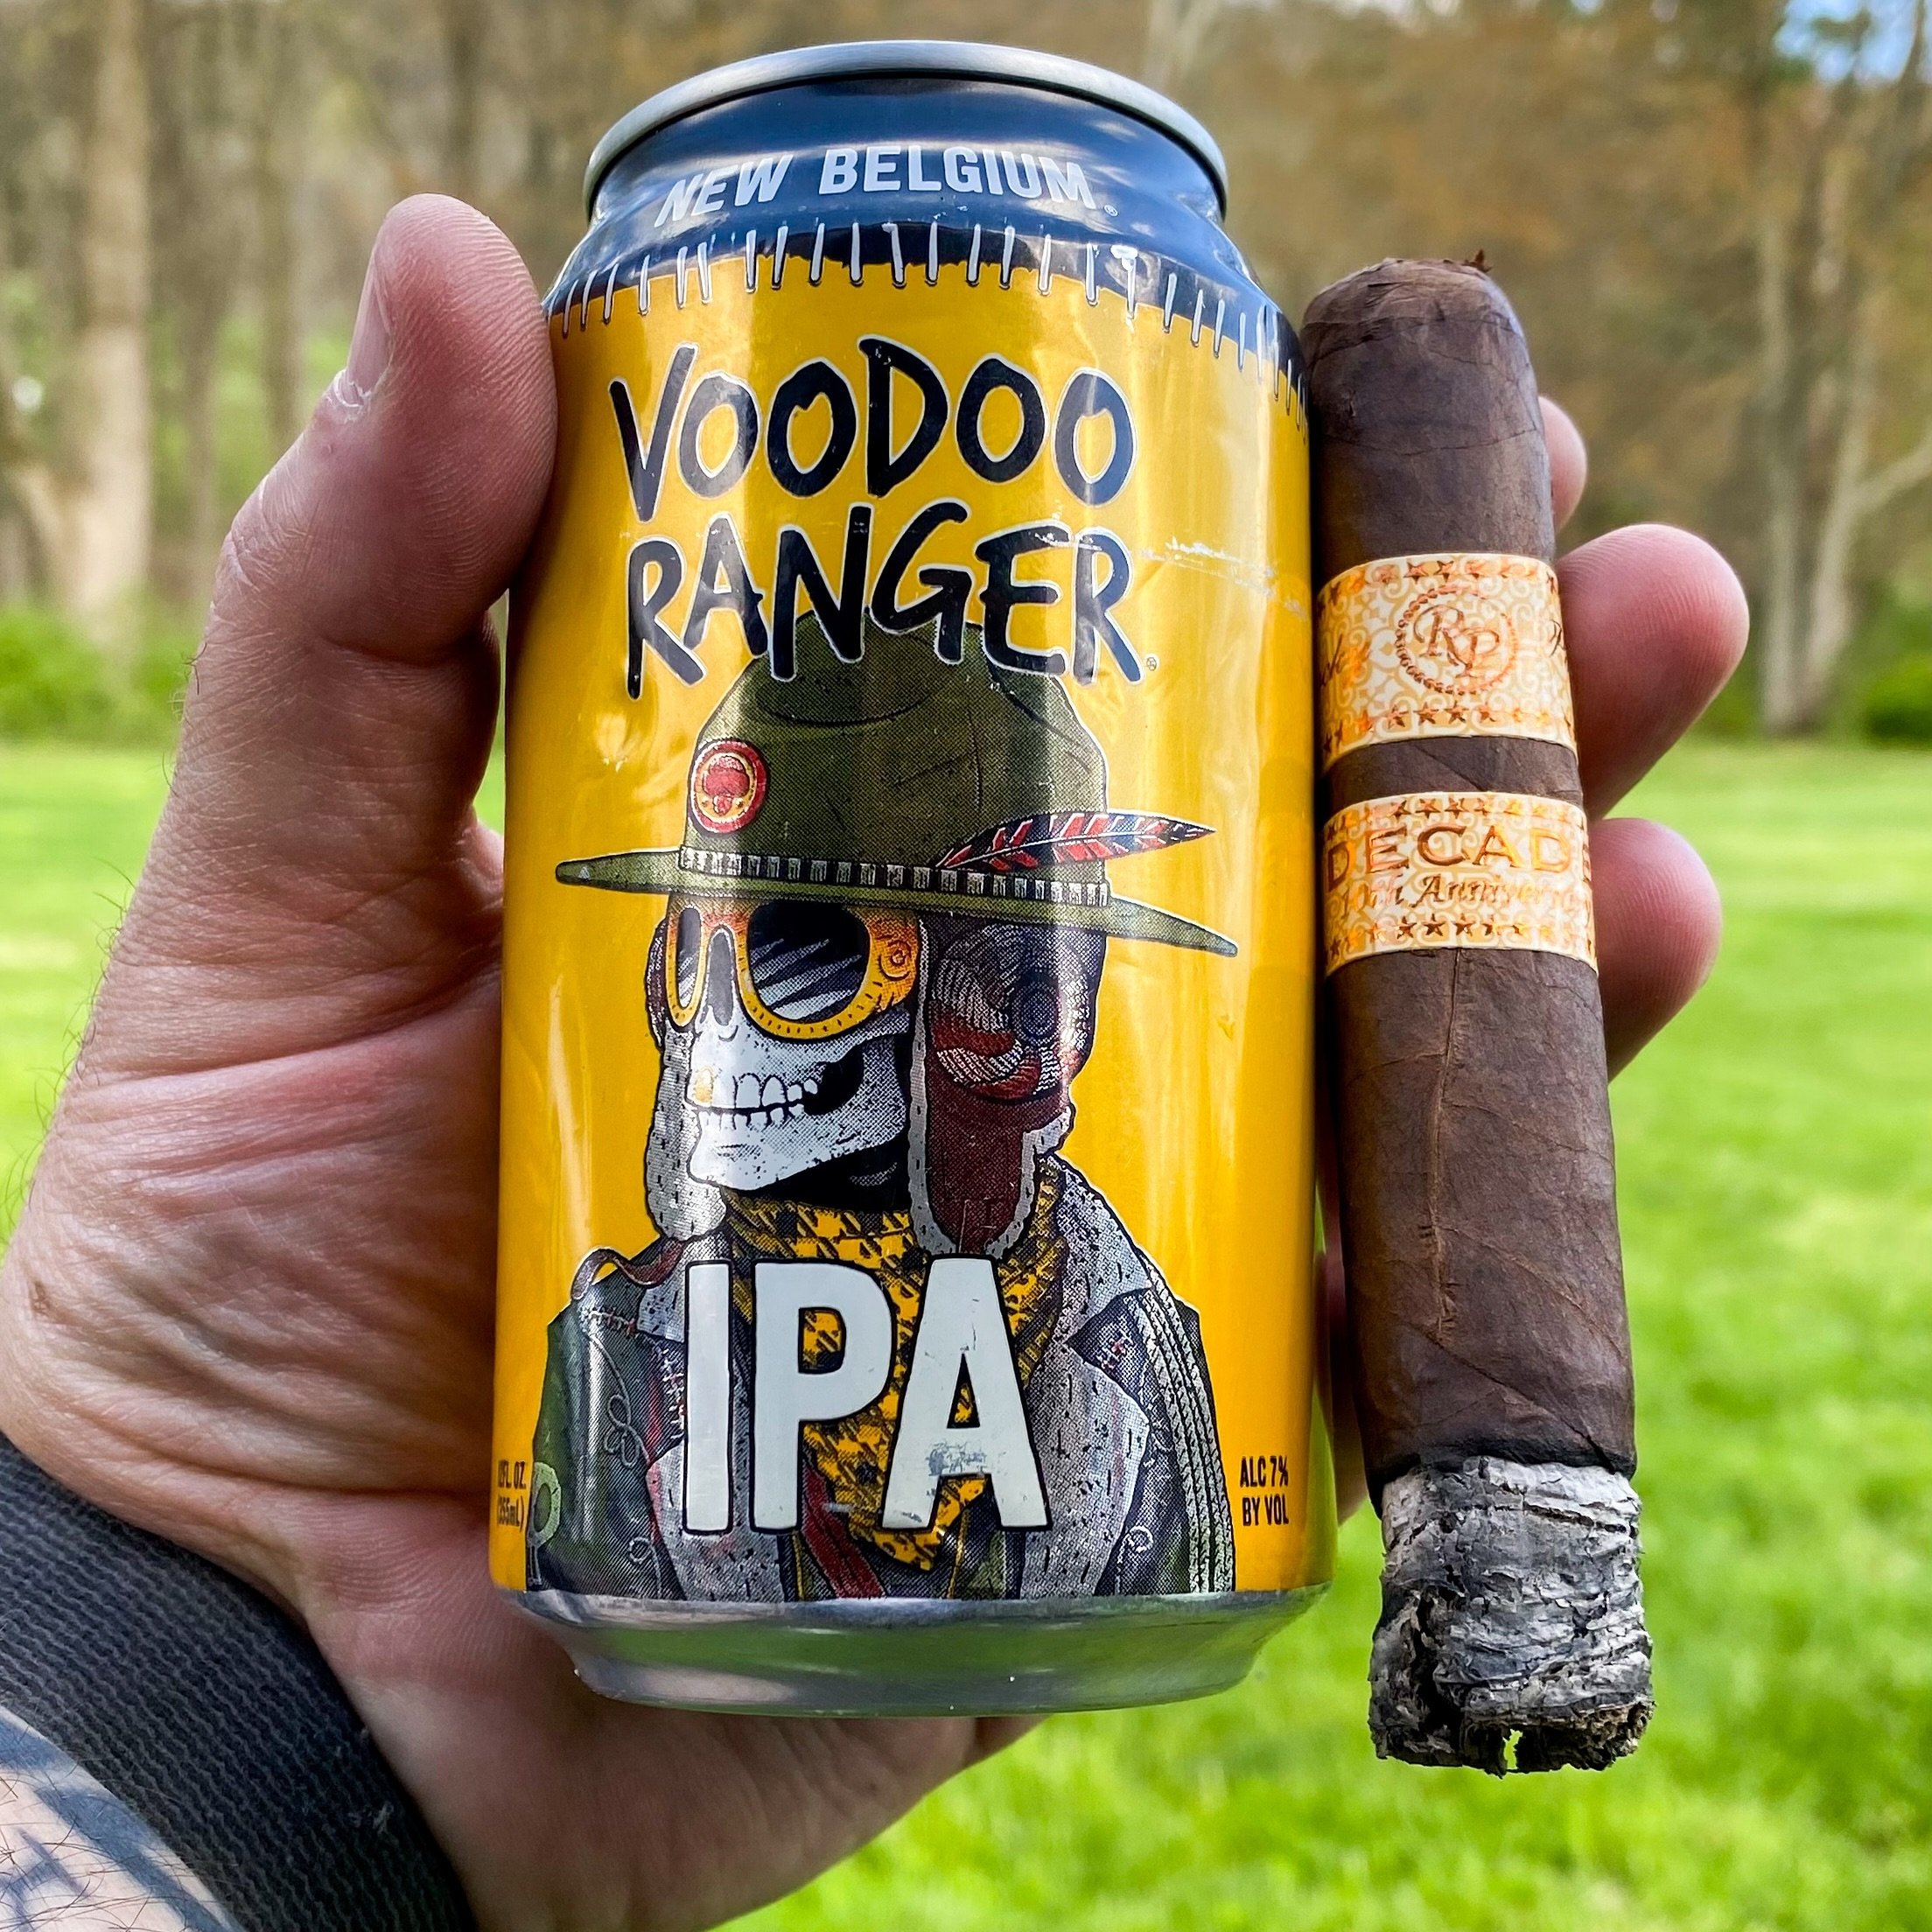 Remember the weekend starts on Thursday now. 

#beer 
#cigarlife